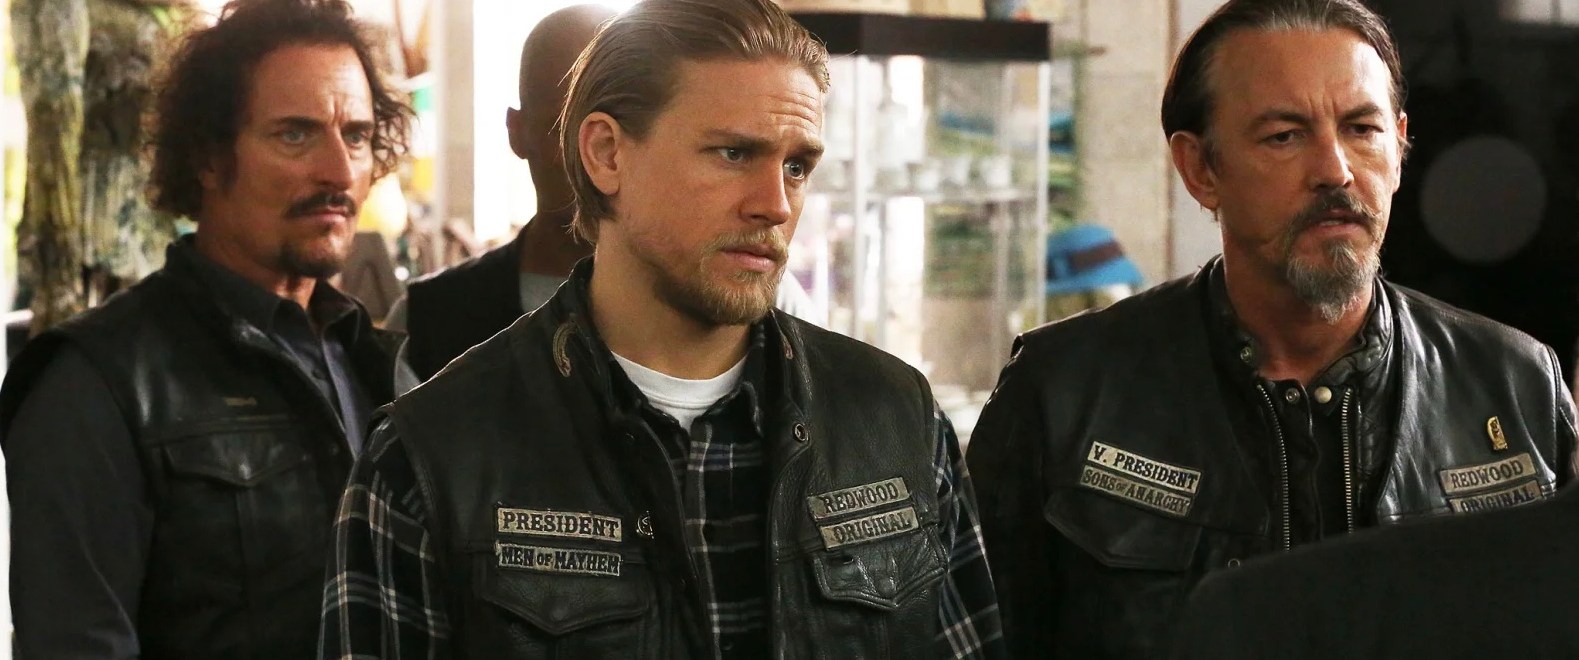 Charlie Hunnam Is Open to Returning to the 'Sons of Anarchy